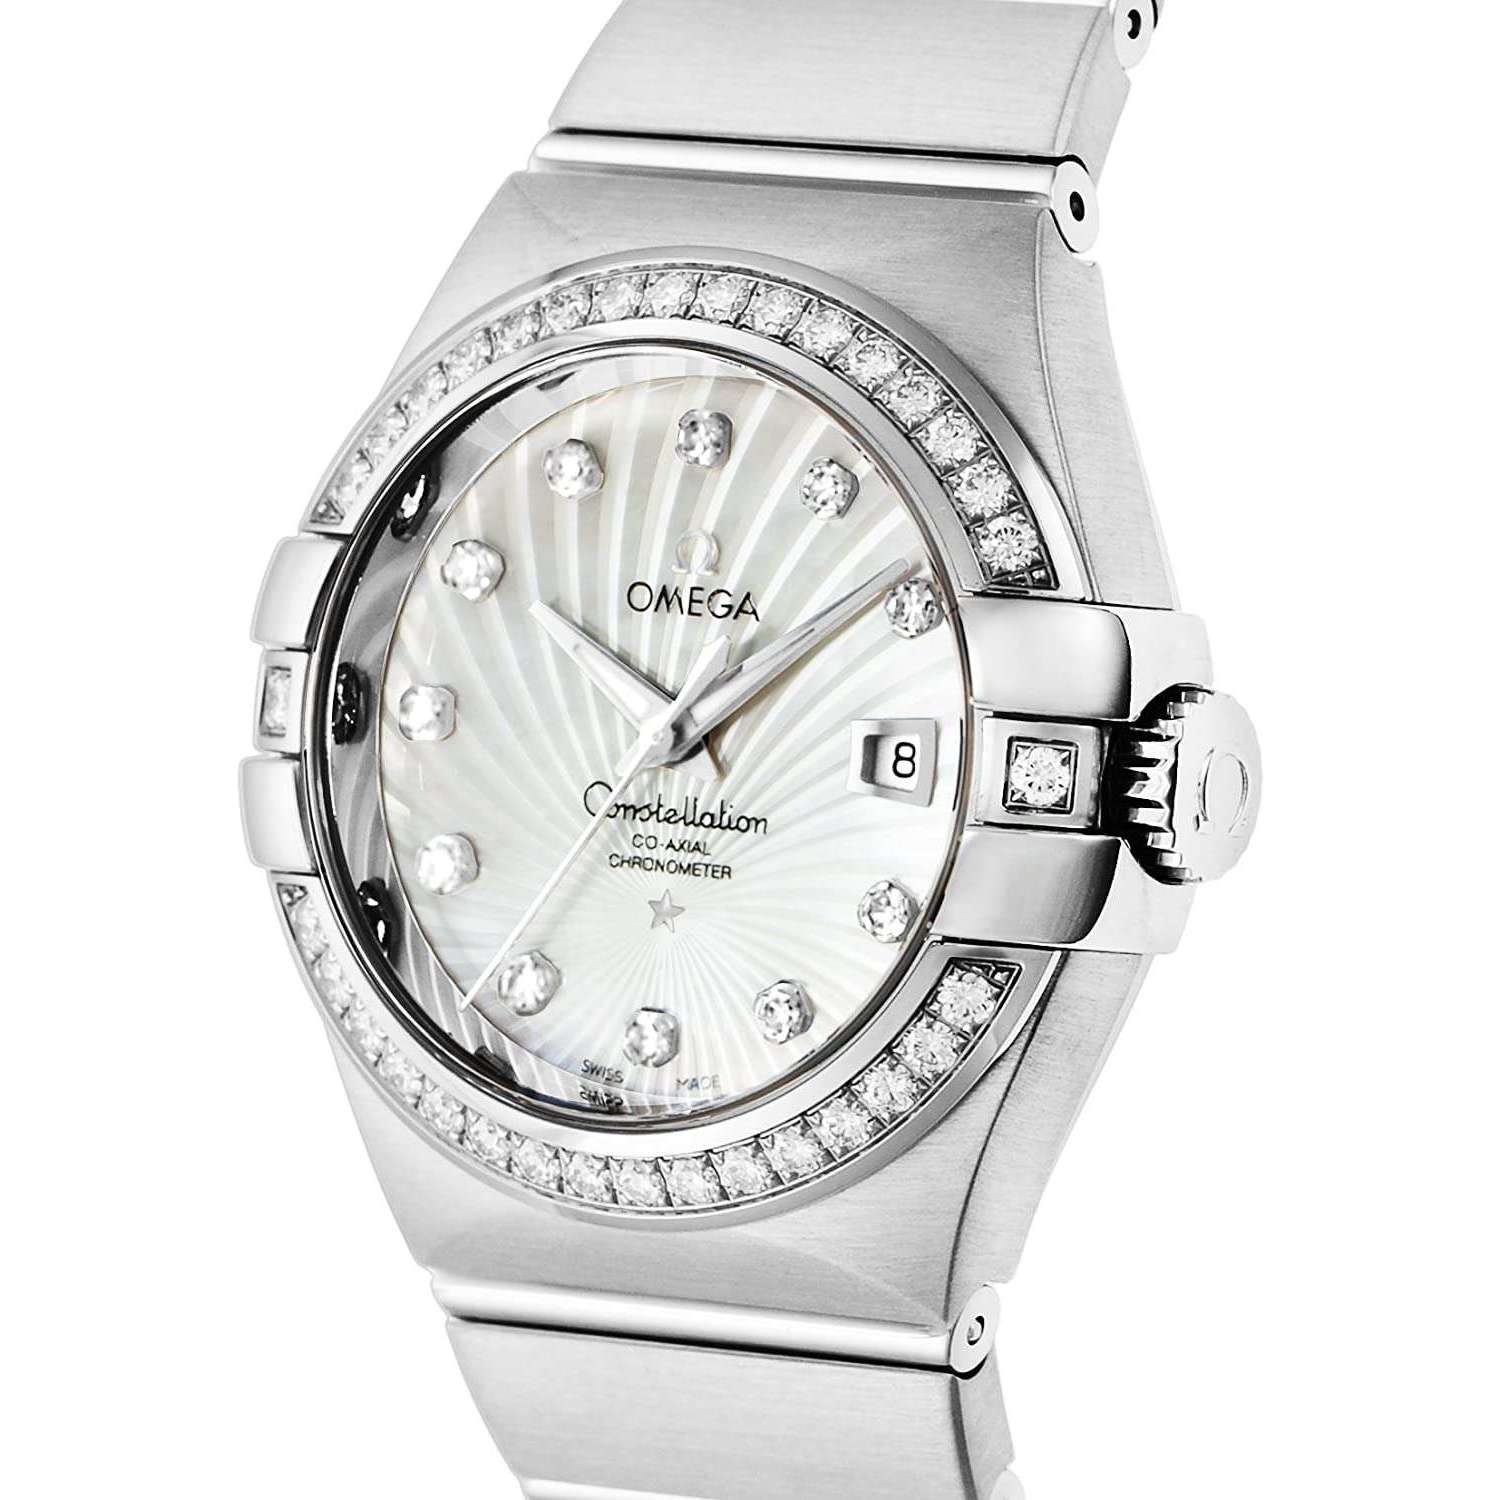 ROOK JAPAN:OMEGA CONSTELLATION CO-AXIAL CHRONOMETER 31 MM WOMEN WATCH 123.55.31.20.55.003,Luxury Watch,Omega